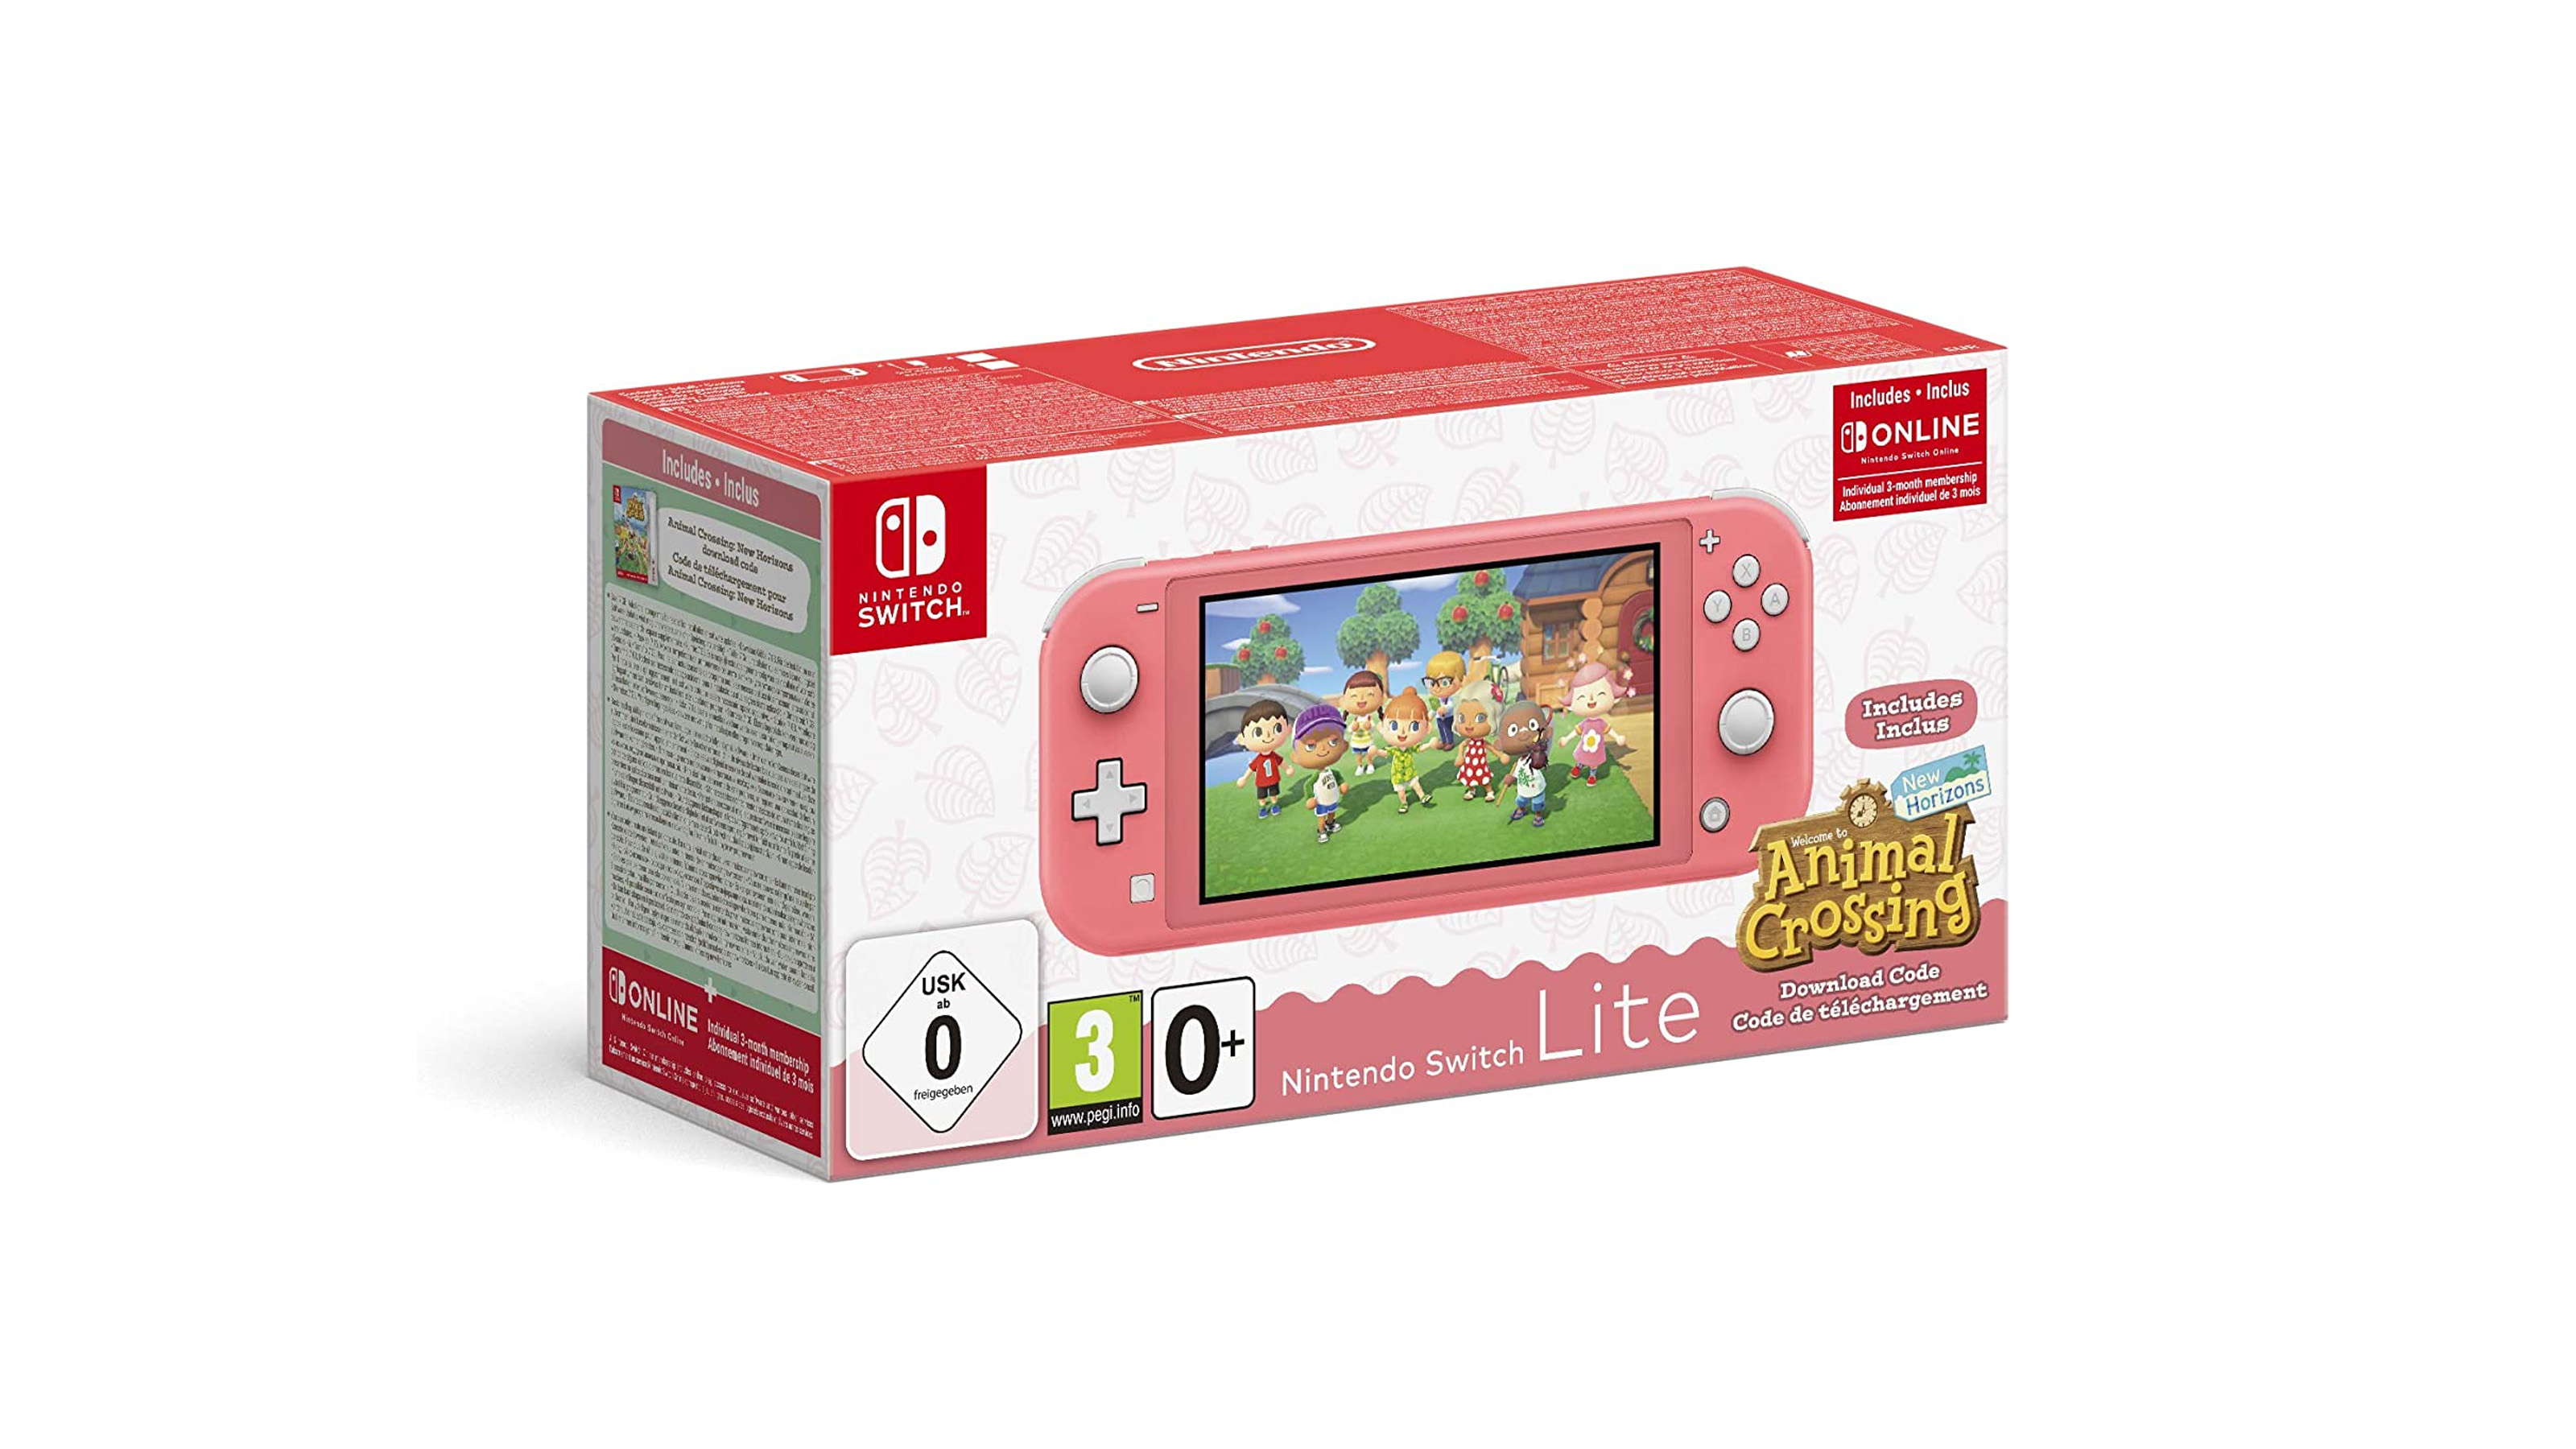 A product shot of the coral Nintendo Switch in an Animal Crossing box